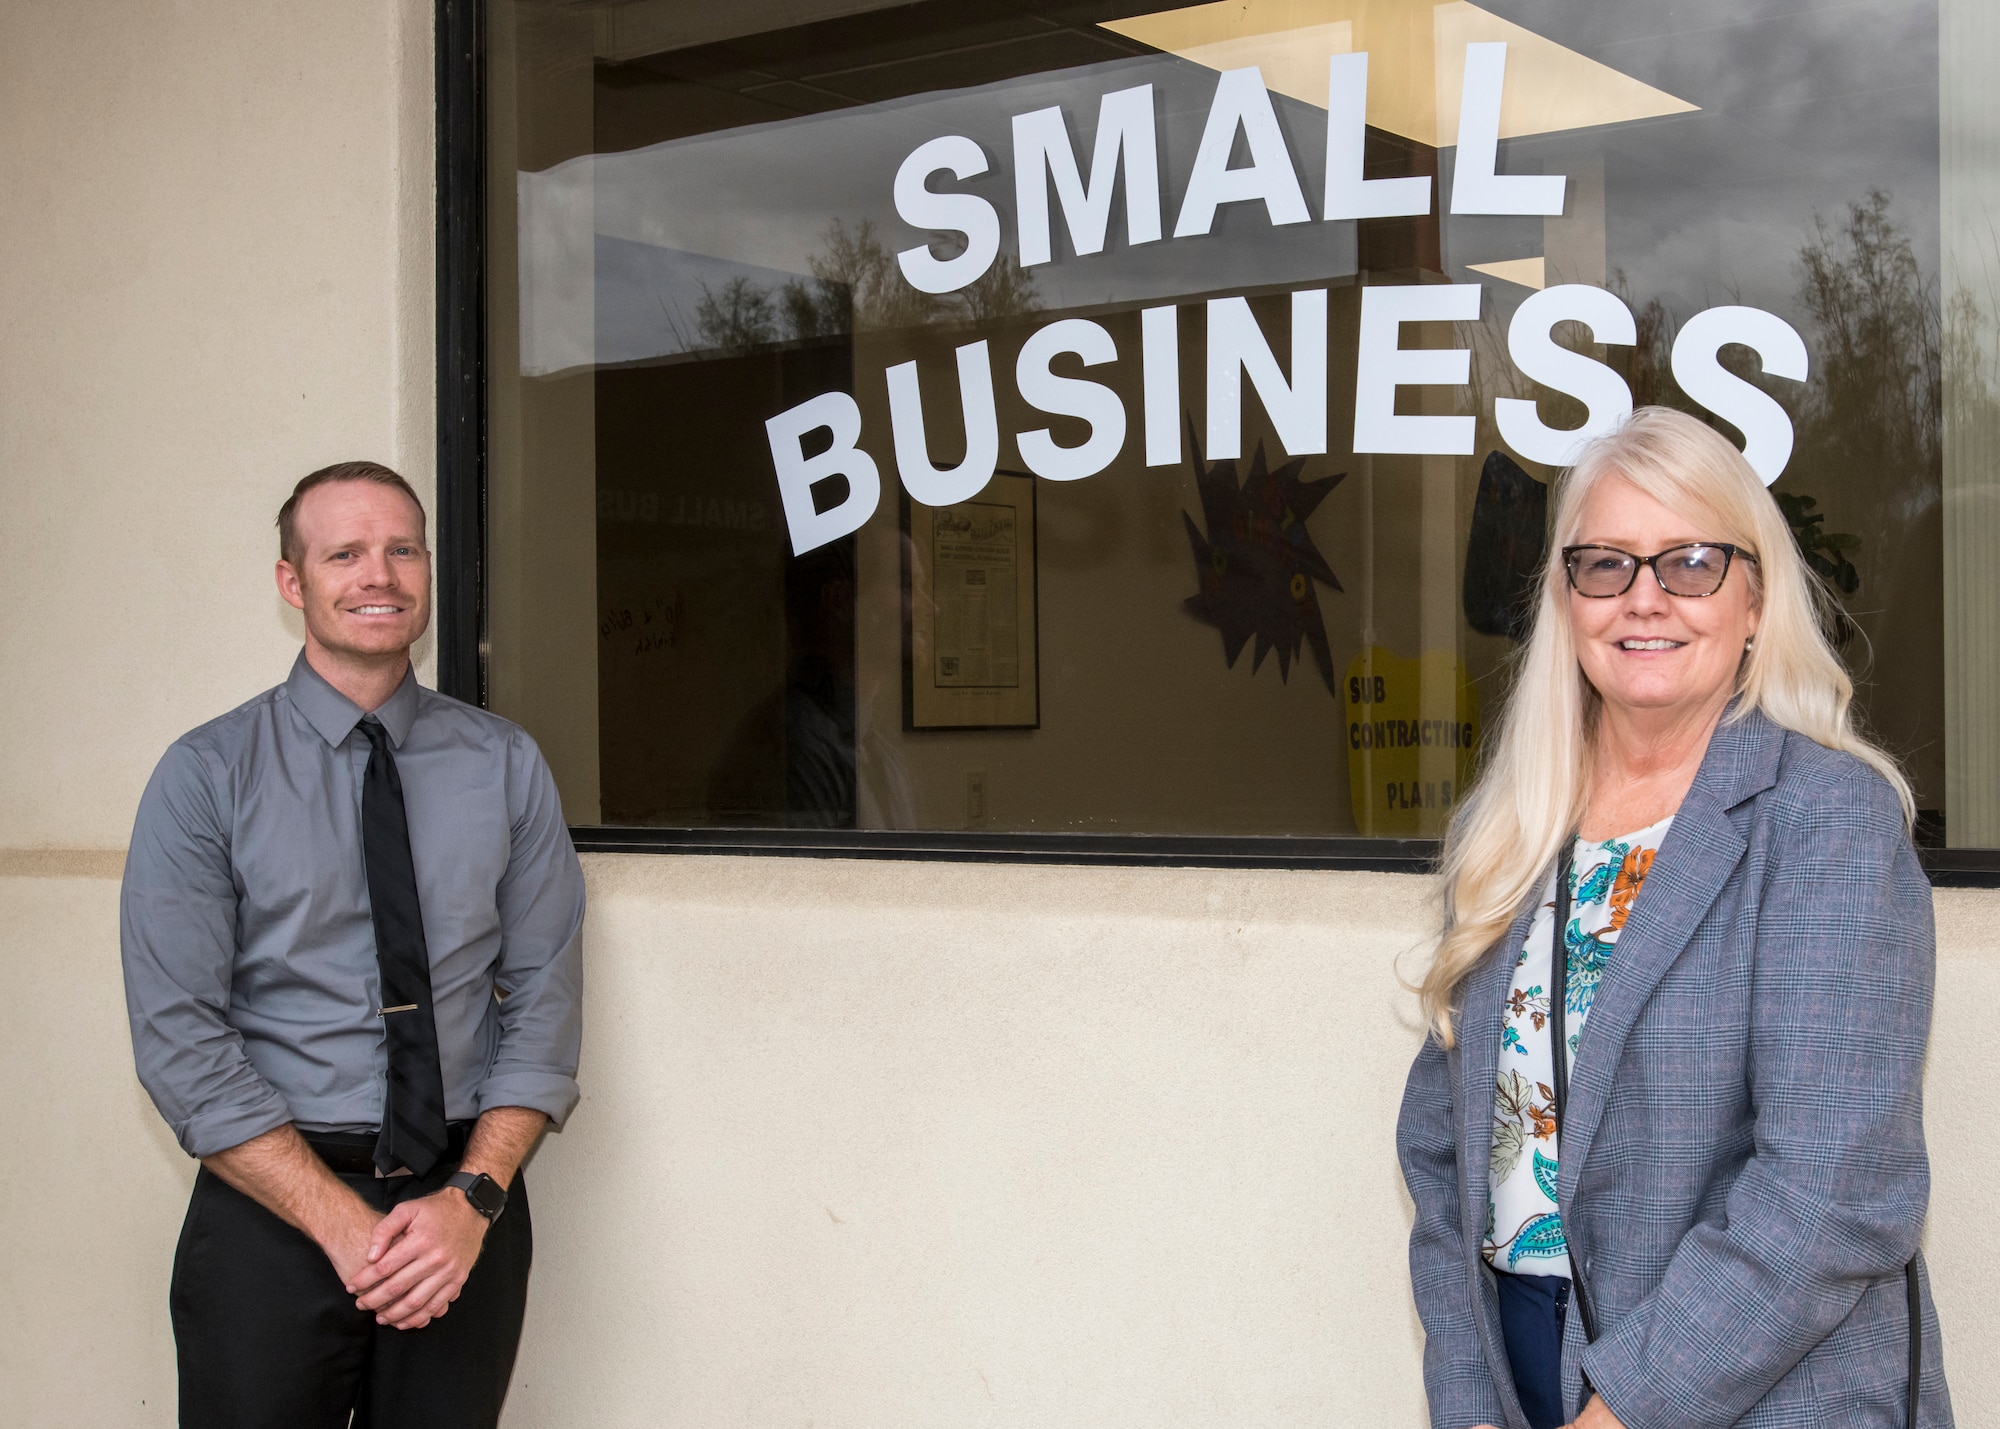 Cynthia Randall and Matthew Chartier from Air Force Test Center Small Business Office at Edwards Air Force Base, California, stand ready to help small businesses establish connections with the Test enterprise. (Air Force photo by Giancarlo Casem)